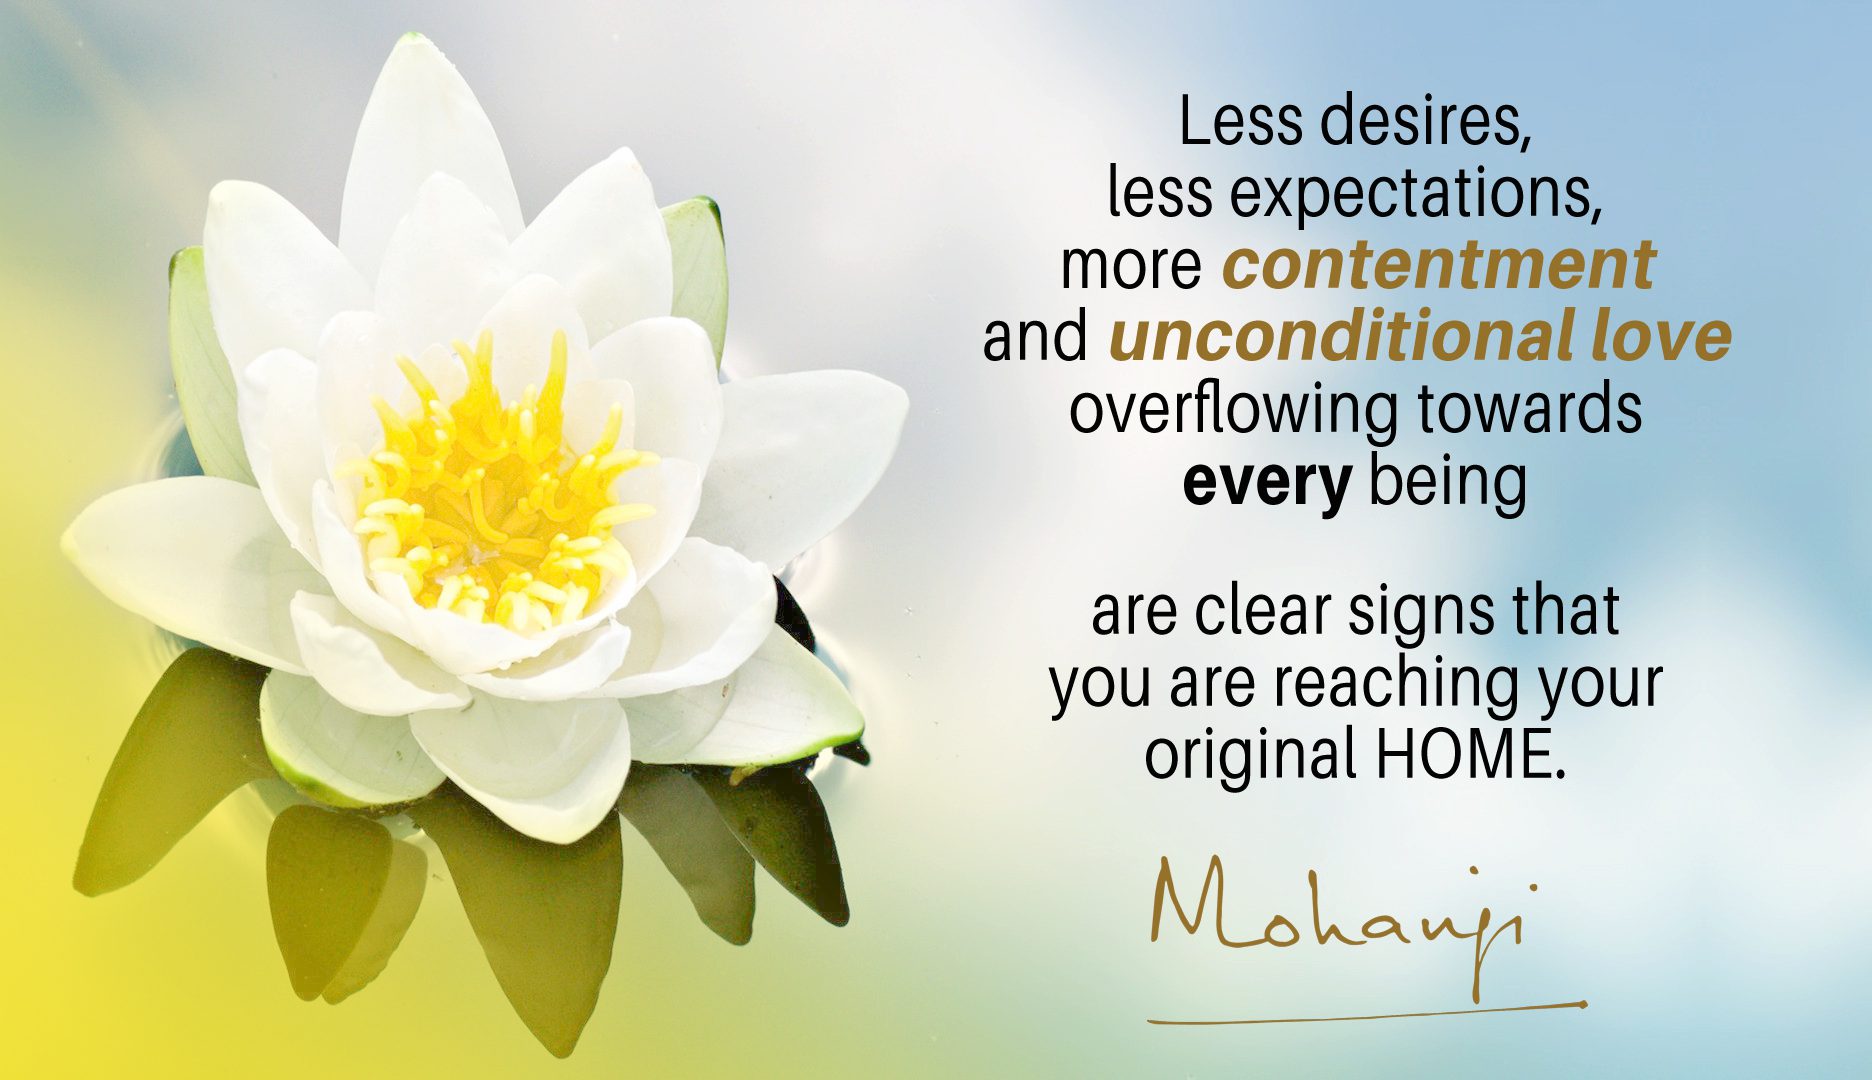 Mohanji quote - Less desires less expectations